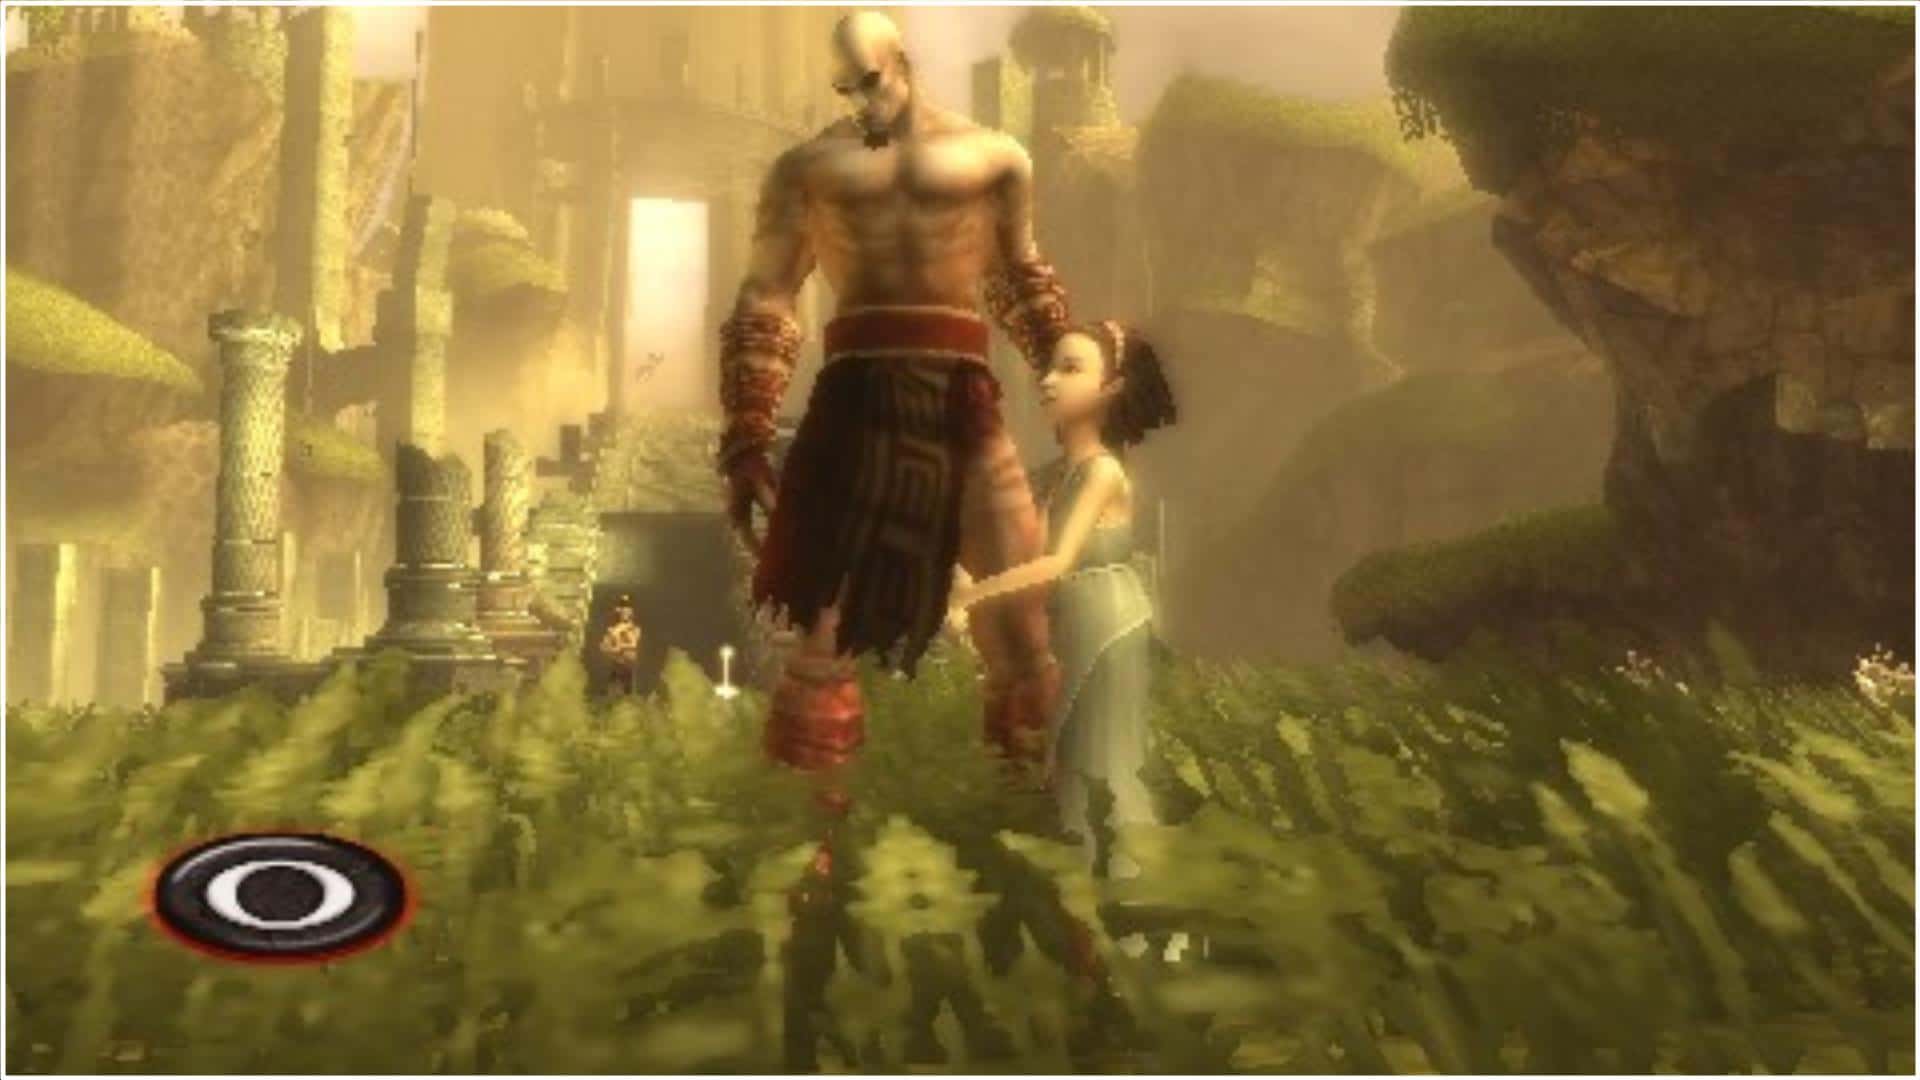 God of War - Chains of Olympus PlayStation Portable (PSP) ROM / ISO  Download - Rom Hustler